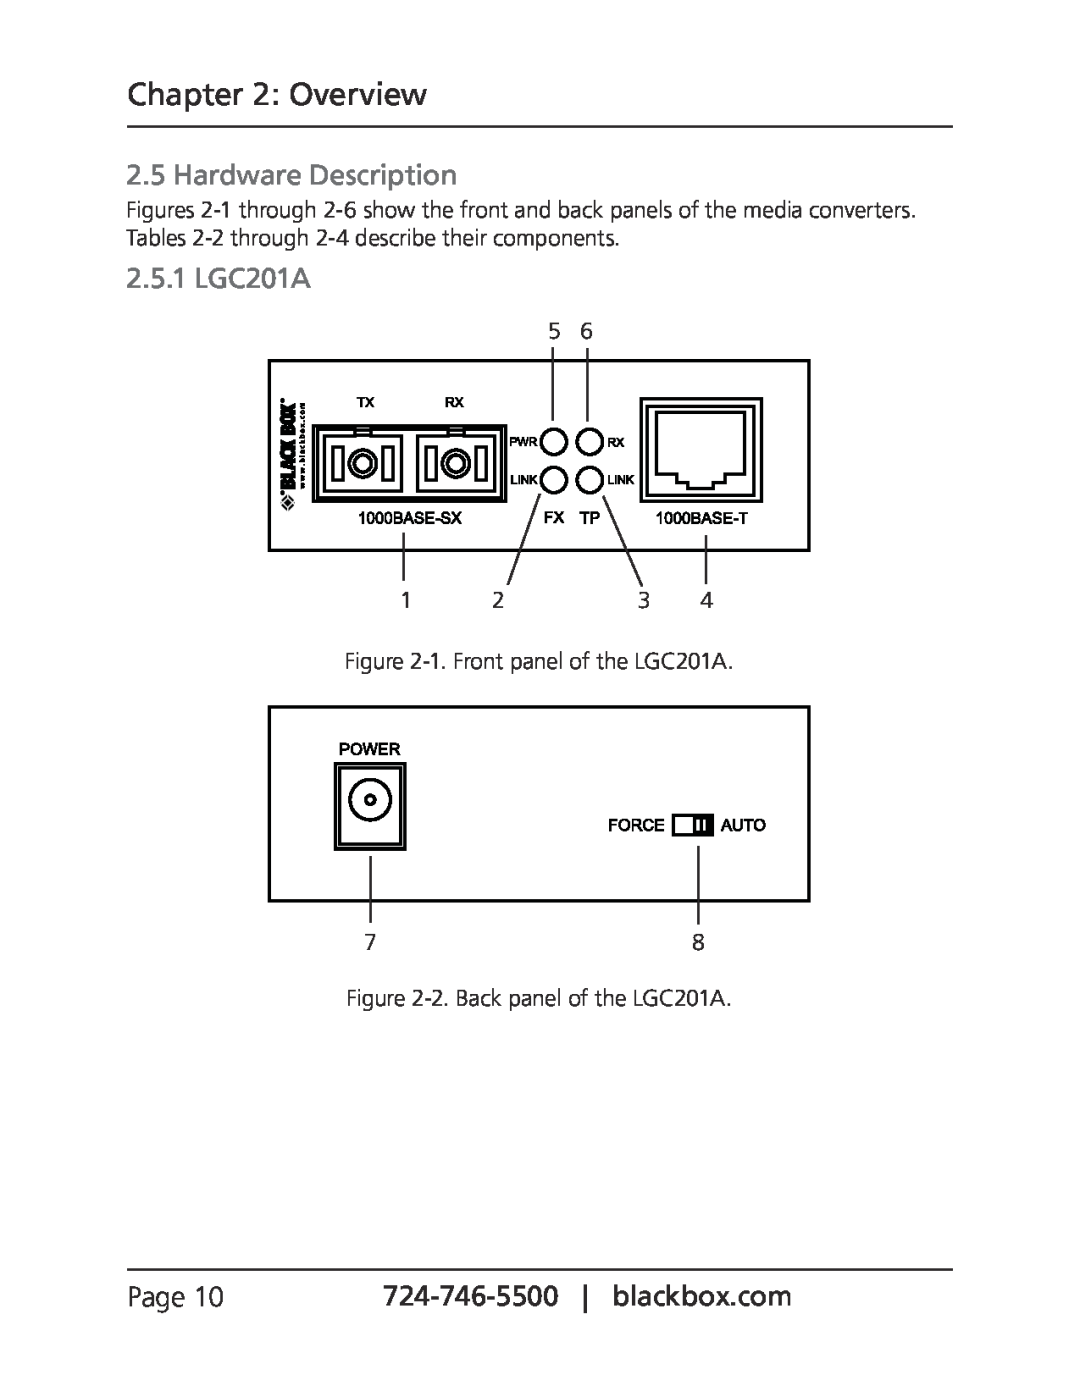 Black Box LGC200A, LGC202A manual Hardware Description, 2.5.1 LGC201A, Overview, Page, 1. Front panel of the LGC201A 